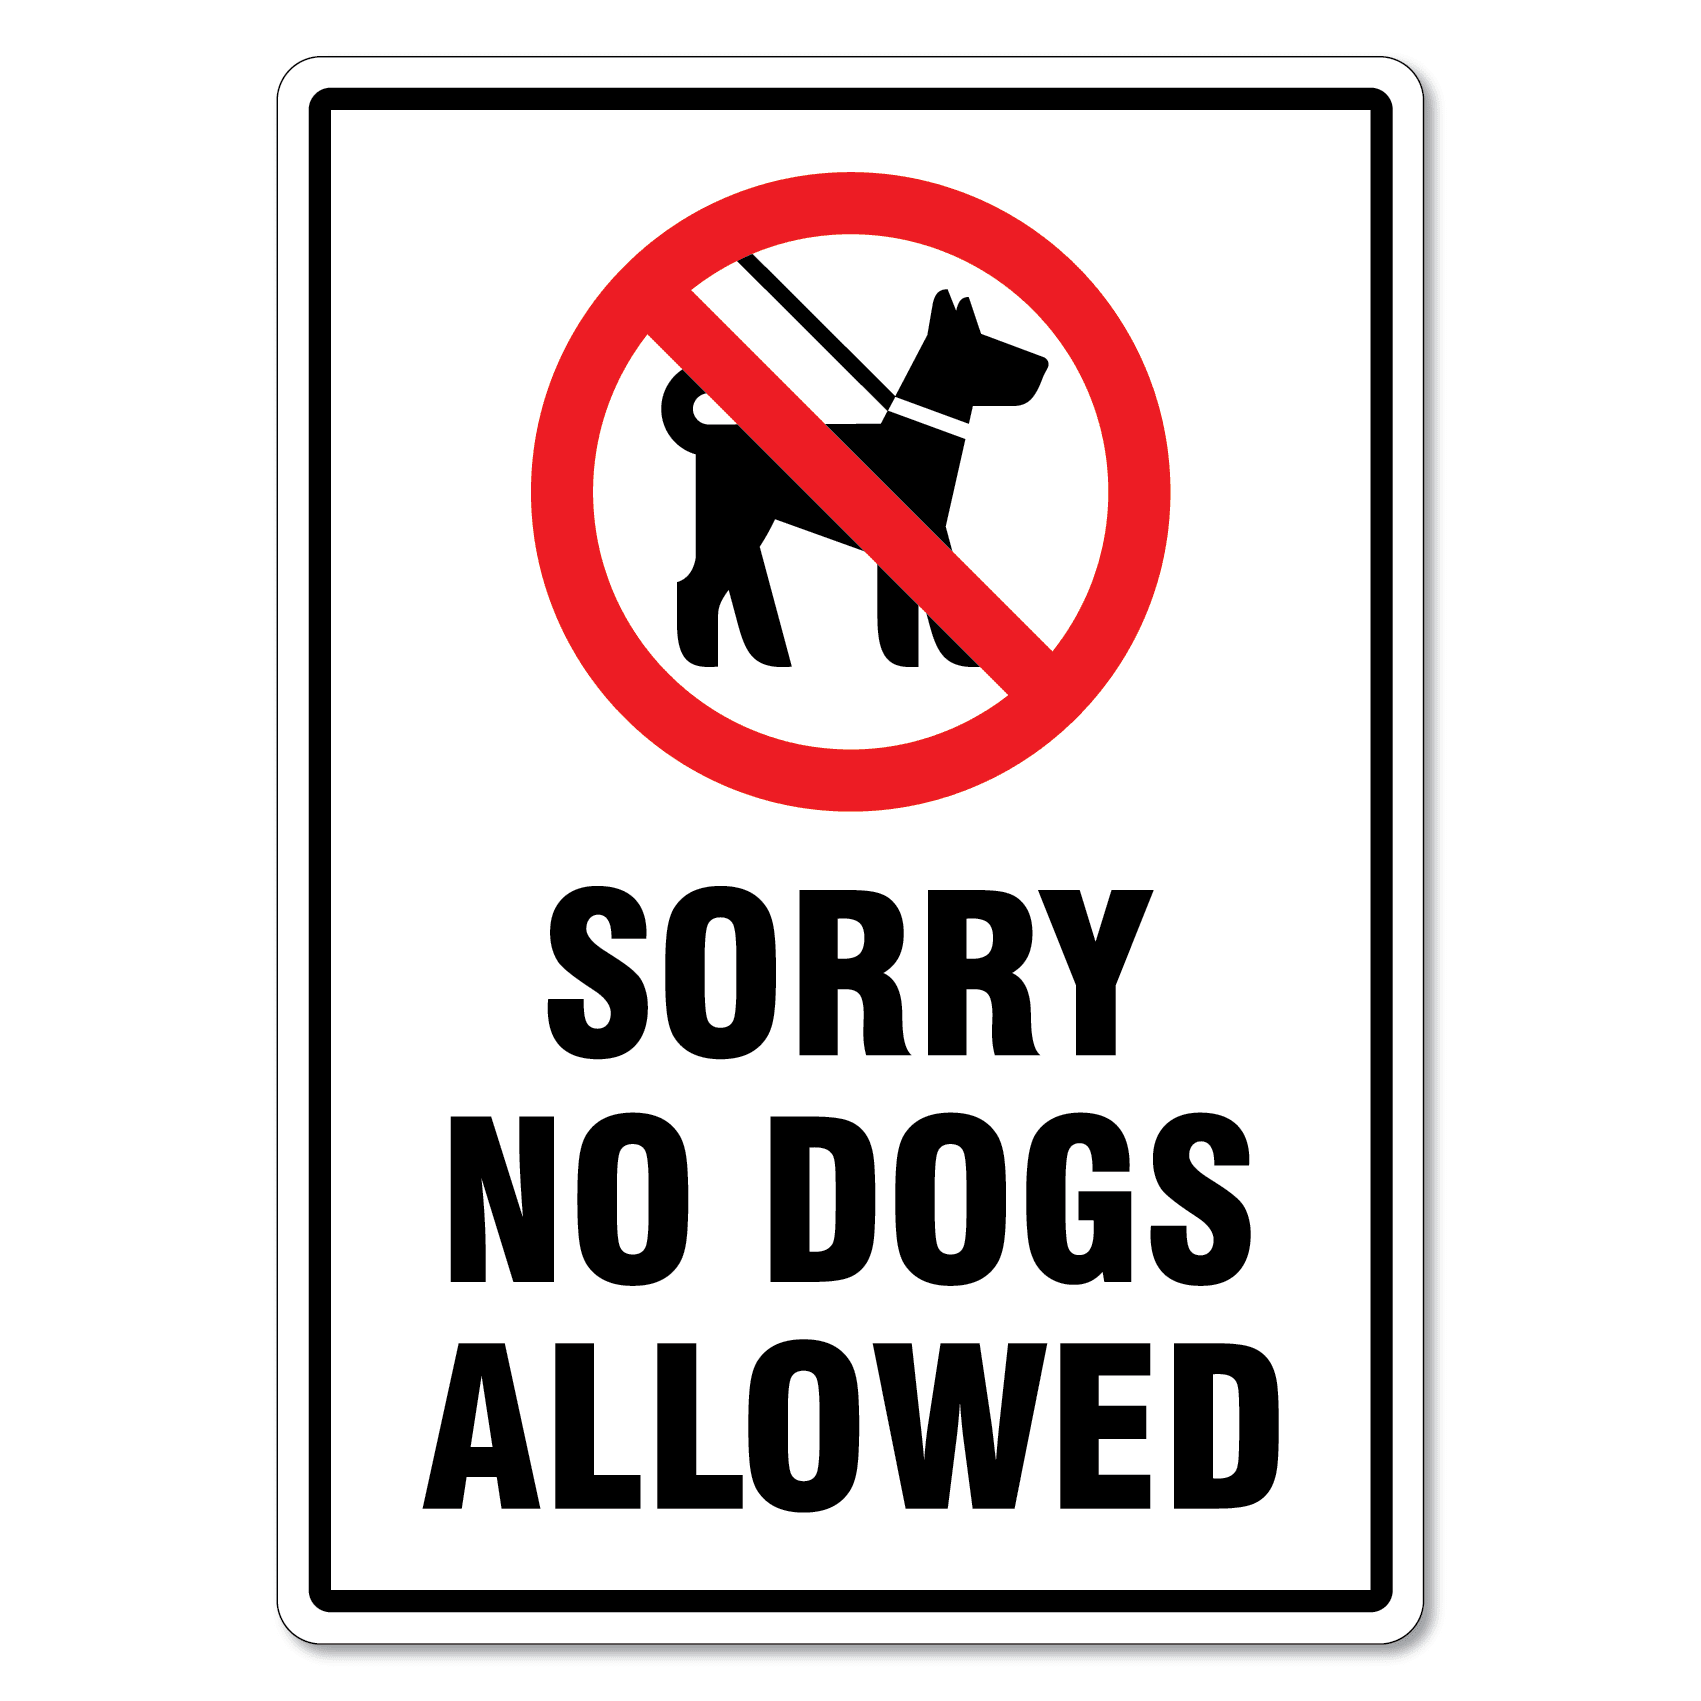 Property is not allowed. No Dogs allowed. No Dogs allowed sign. Ноу сори. Pets are not allowed.